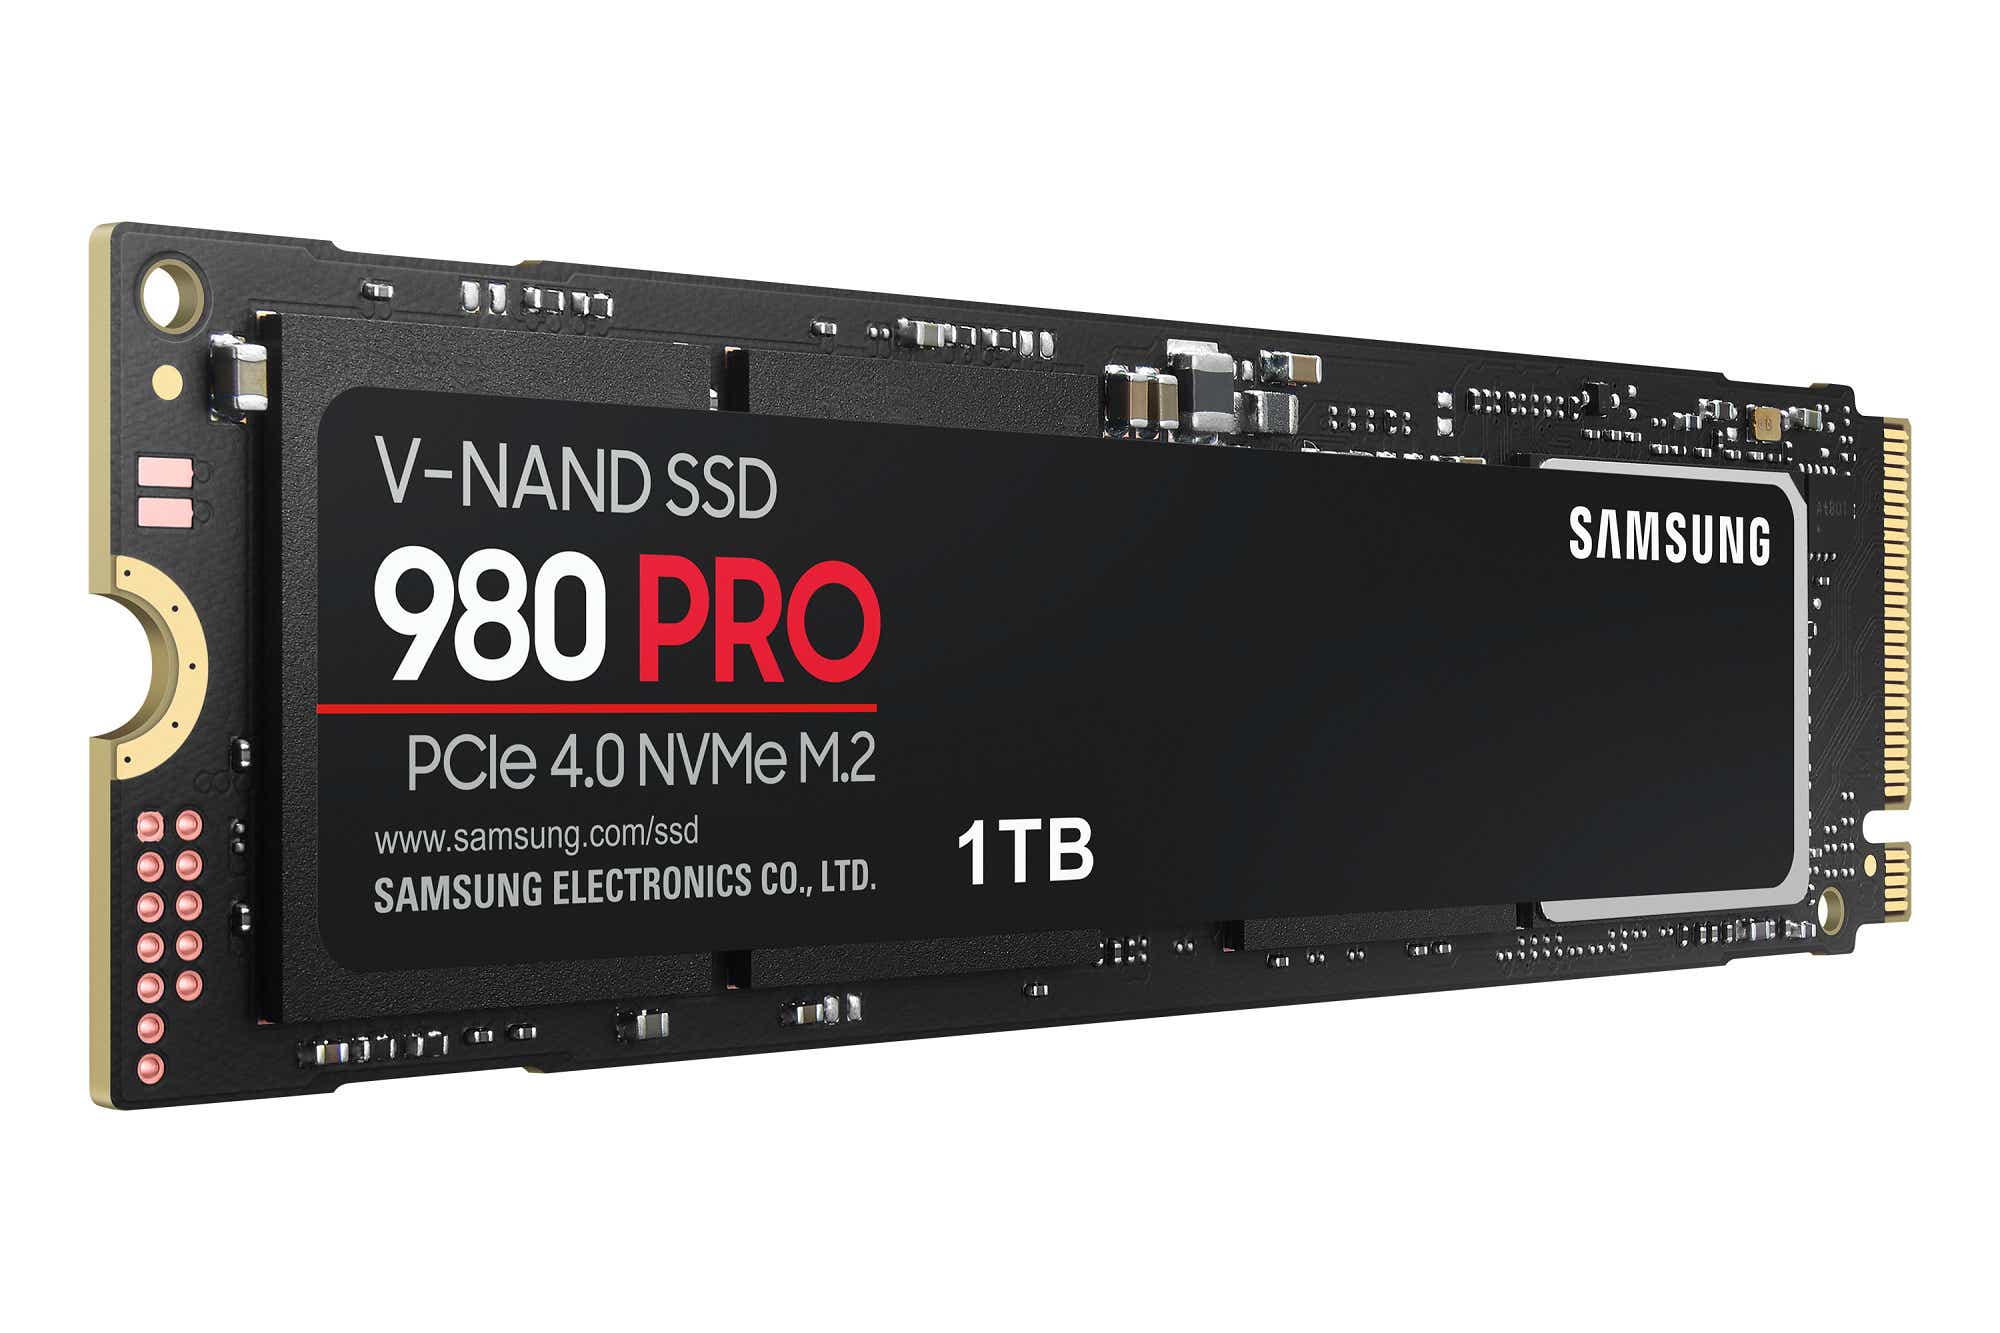 Samsung 980 Pro - Best PCIe 4.0 SSD for most people